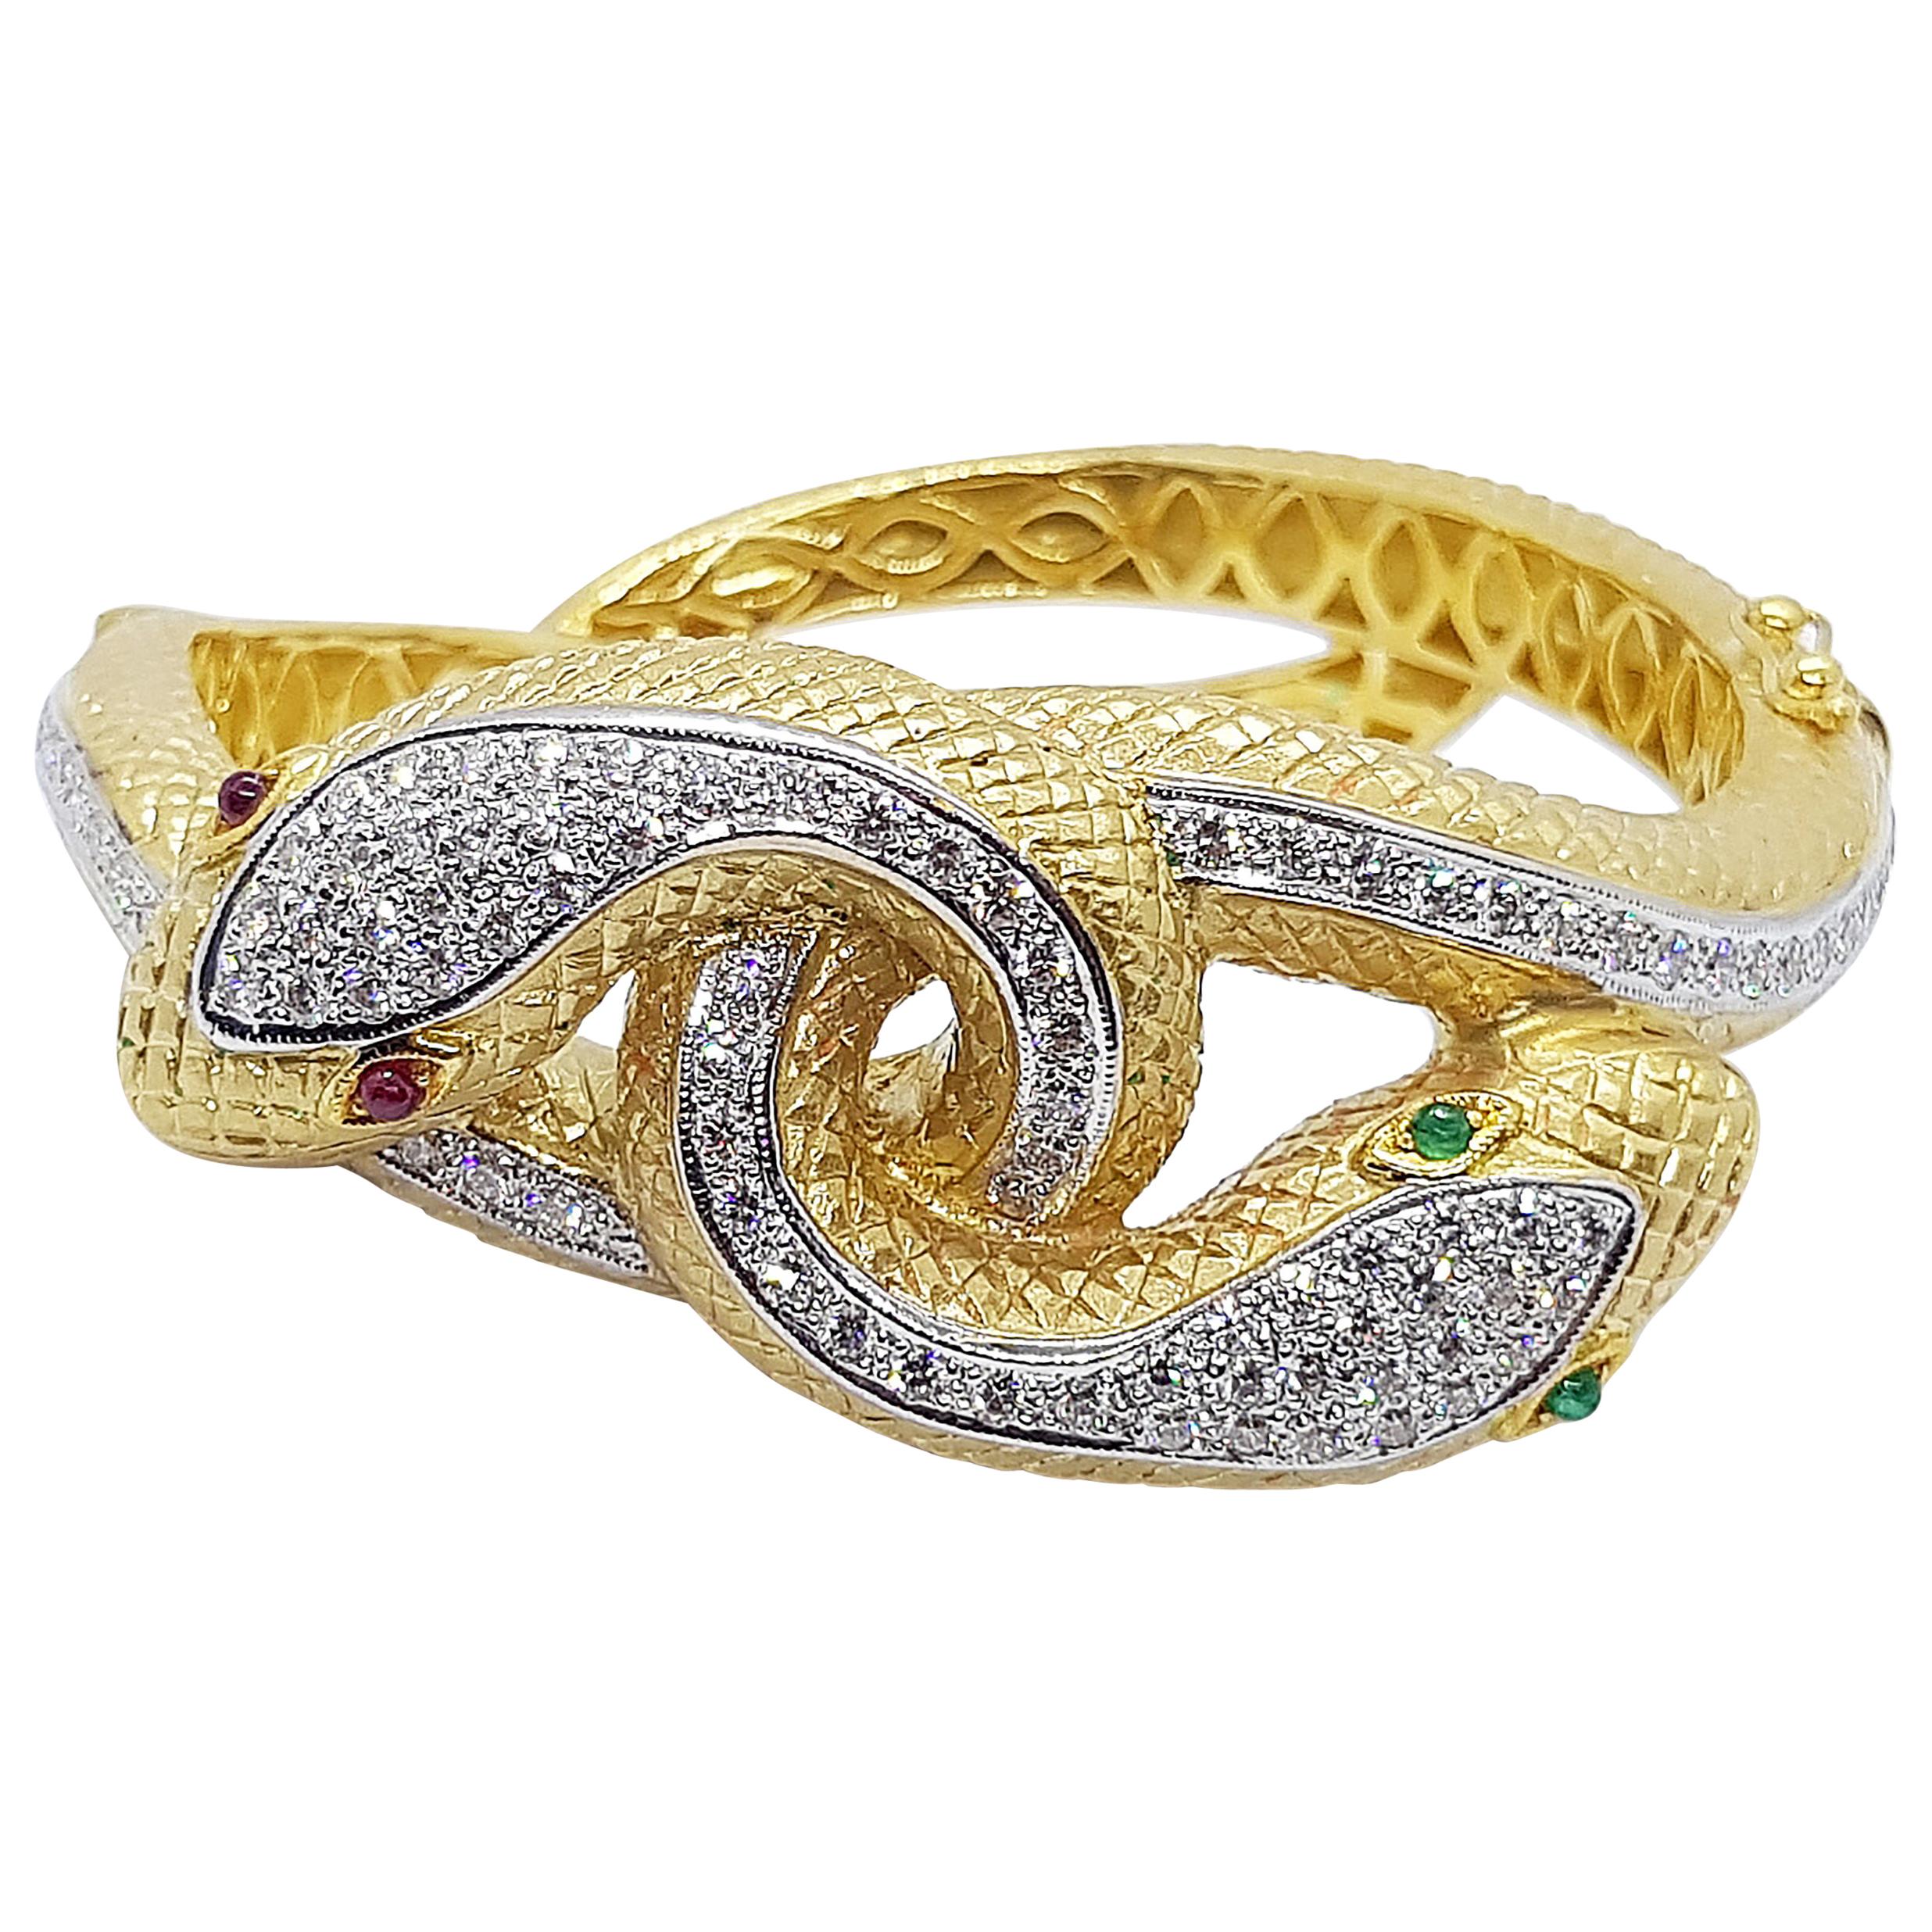 Cabochon Ruby, Cabochon Emerald and Diamond Snake Bangle Set in 18 Karat Gold For Sale